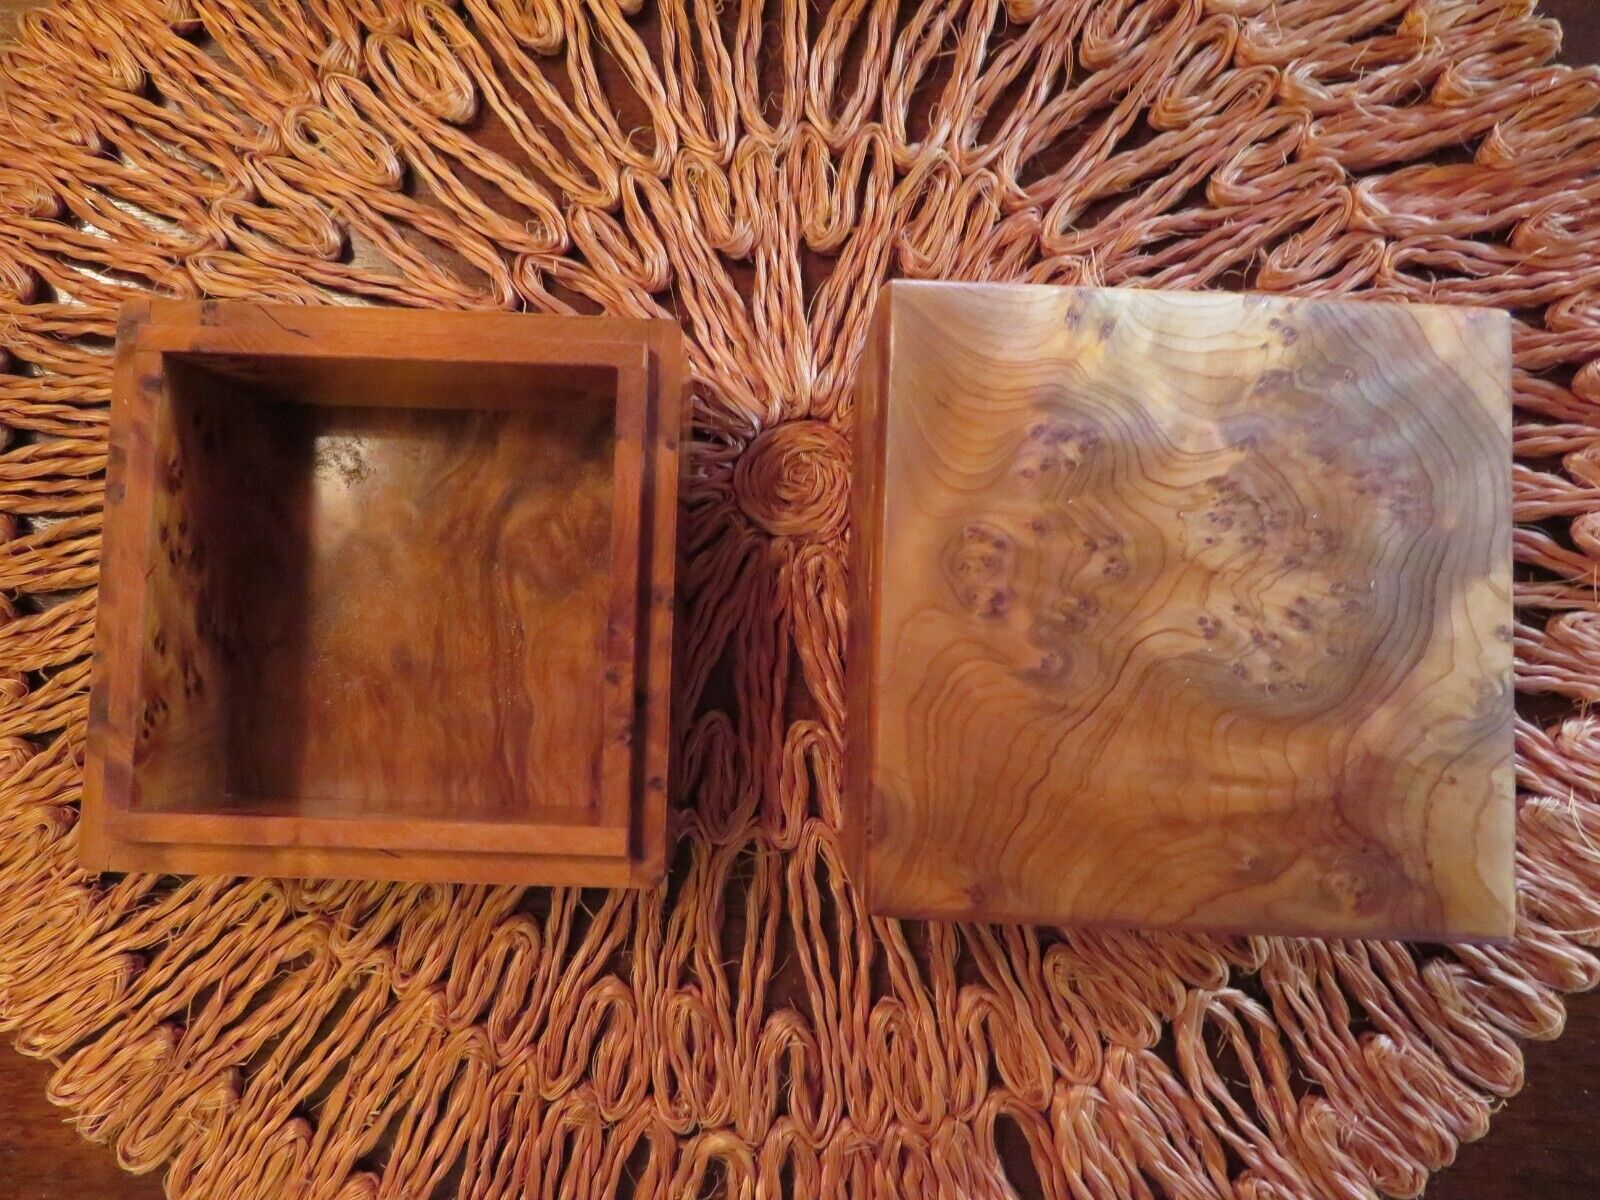 Exquisite Burl Maple Box, 2 level, two sections, one lid. California. 